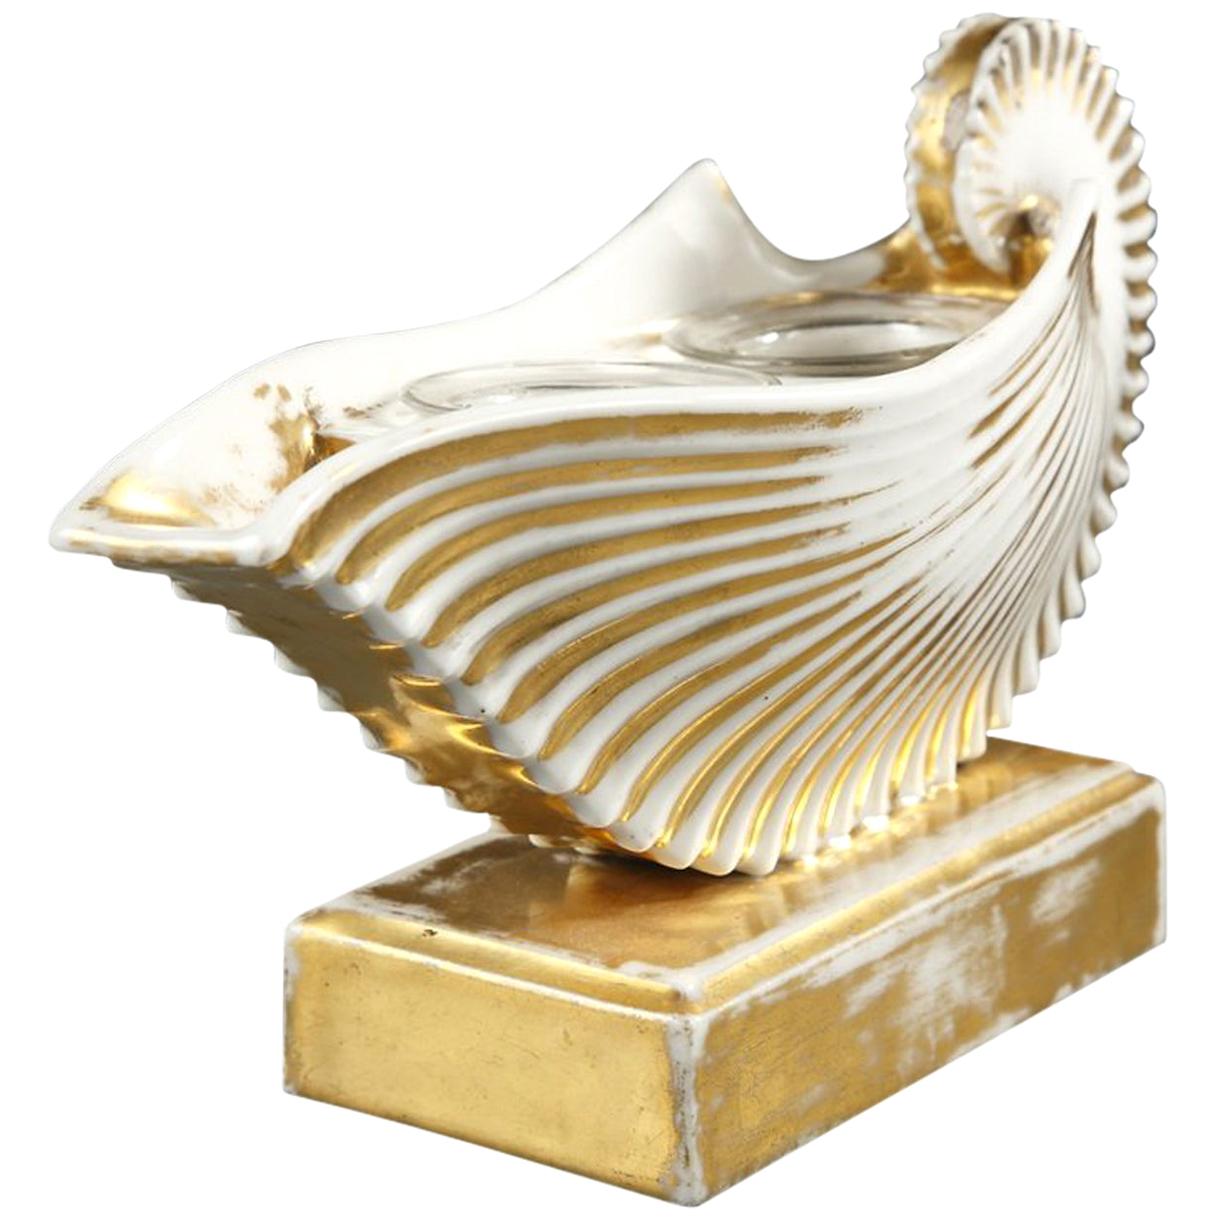 19th Century Shell-Shaped, White Porcelain Inkwell For Sale